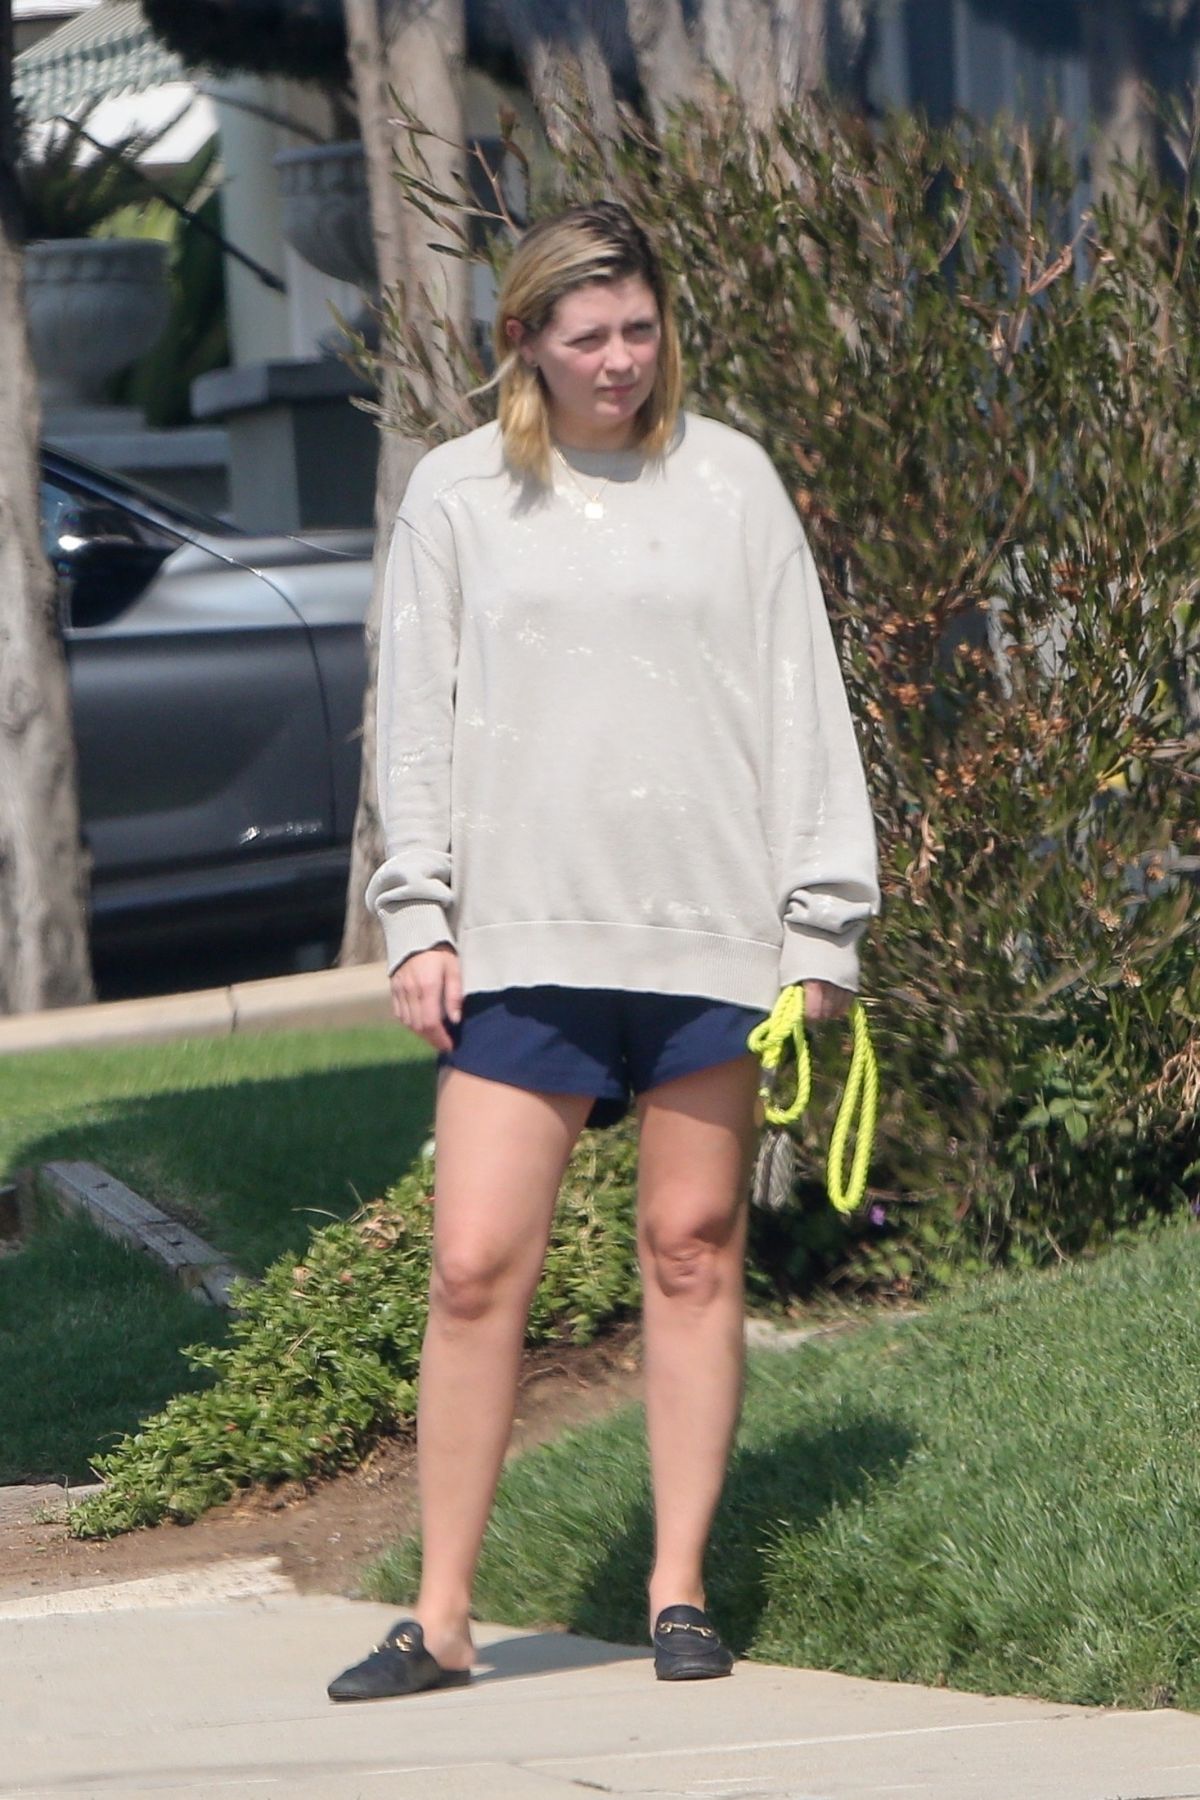 mischa-barton-out-with-her-dog-in-los-angeles-10-04-2020-11.jpg